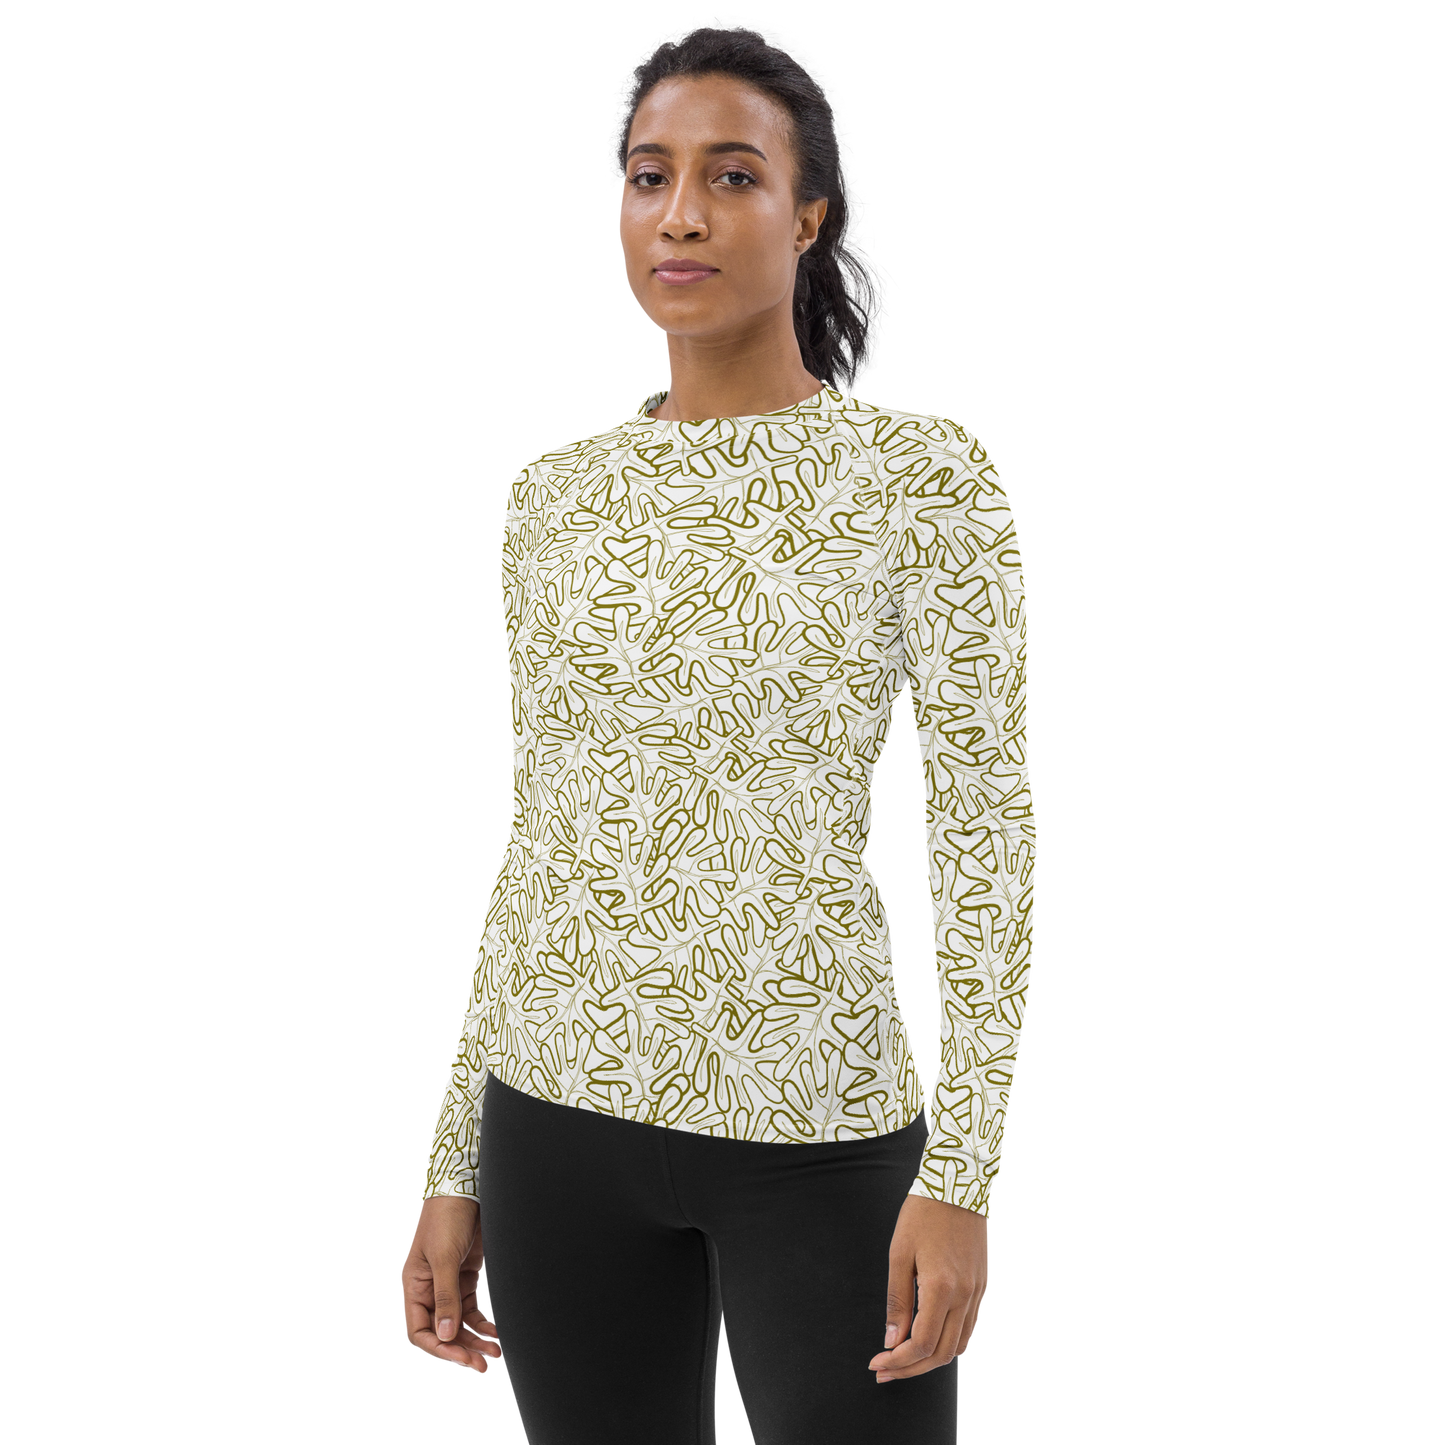 Colorful Fall Leaves | Seamless Patterns | All-Over Print Women's Rash Guard - #2